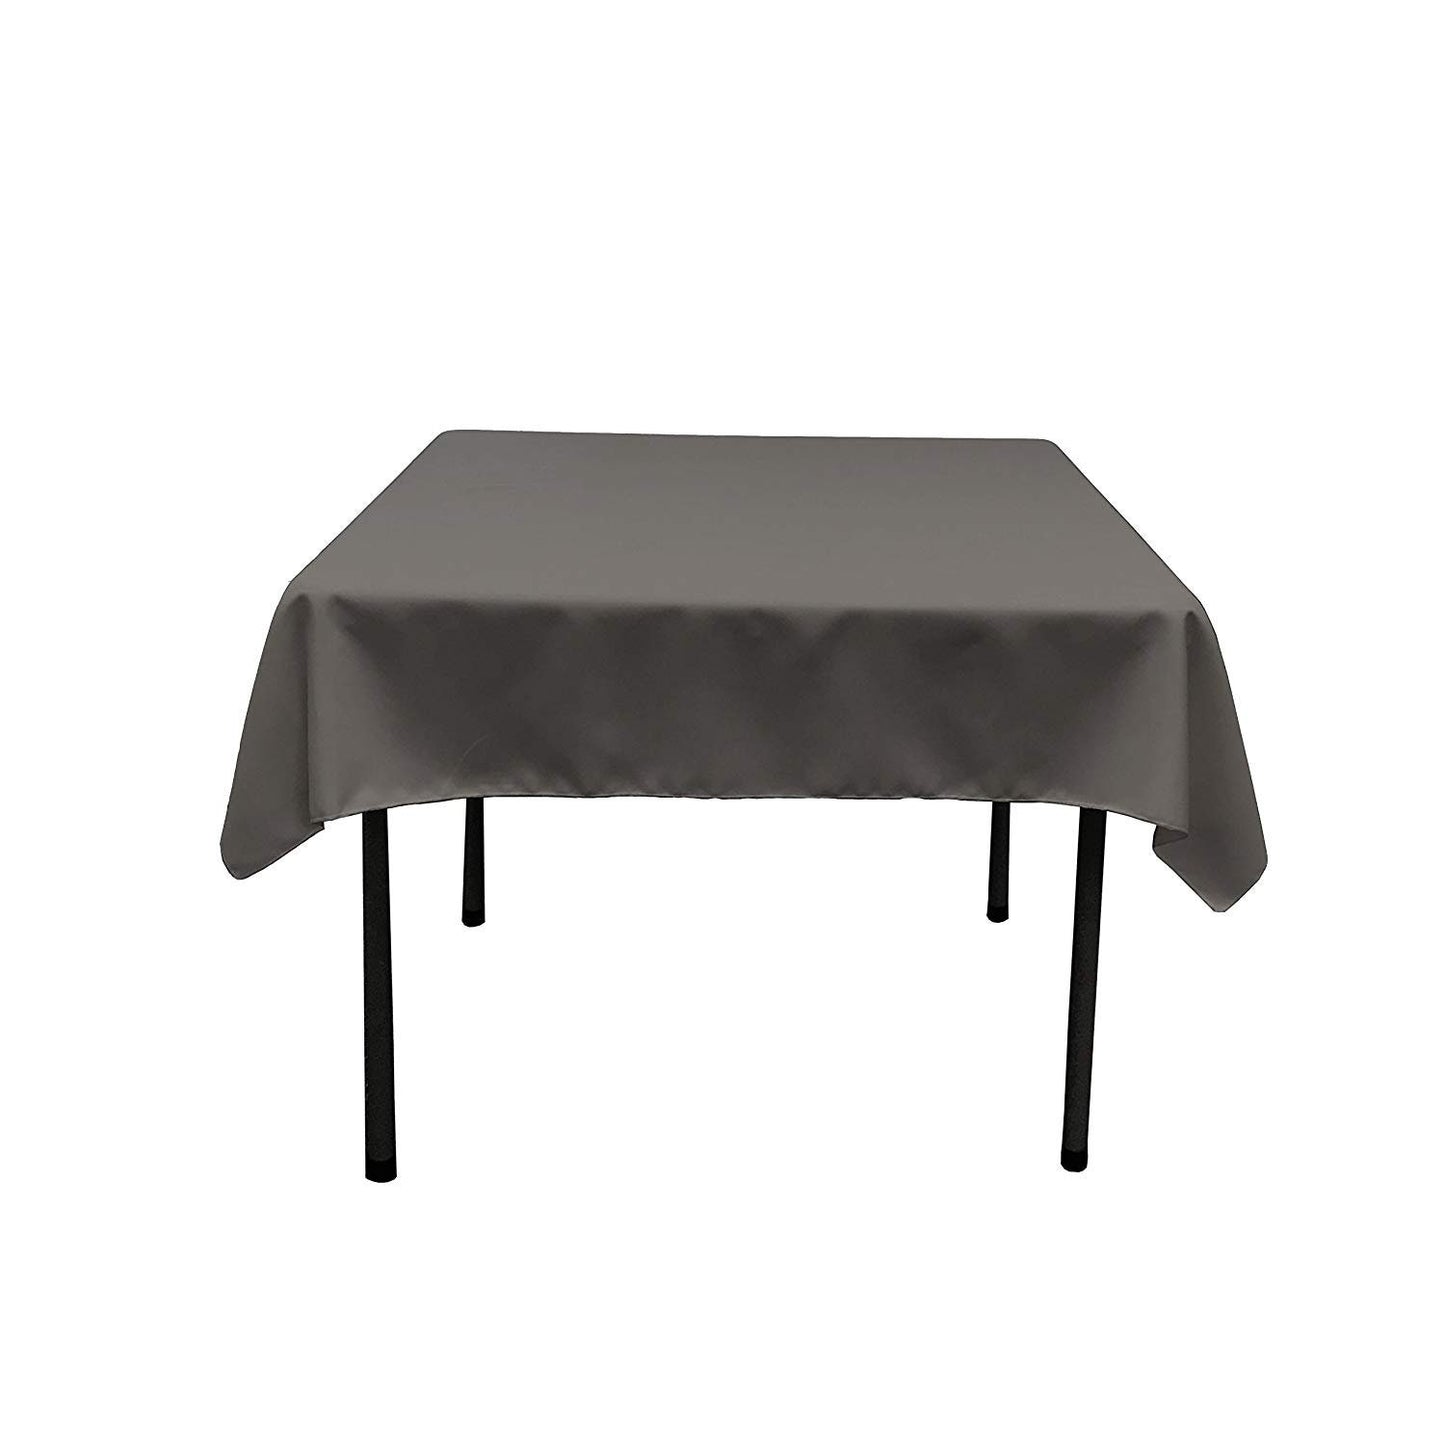 54 x 54-Inch Seamless Charcoal Rectangular Polyester Tablecloth for Wedding Party Decorations Square Table Cloth Cover